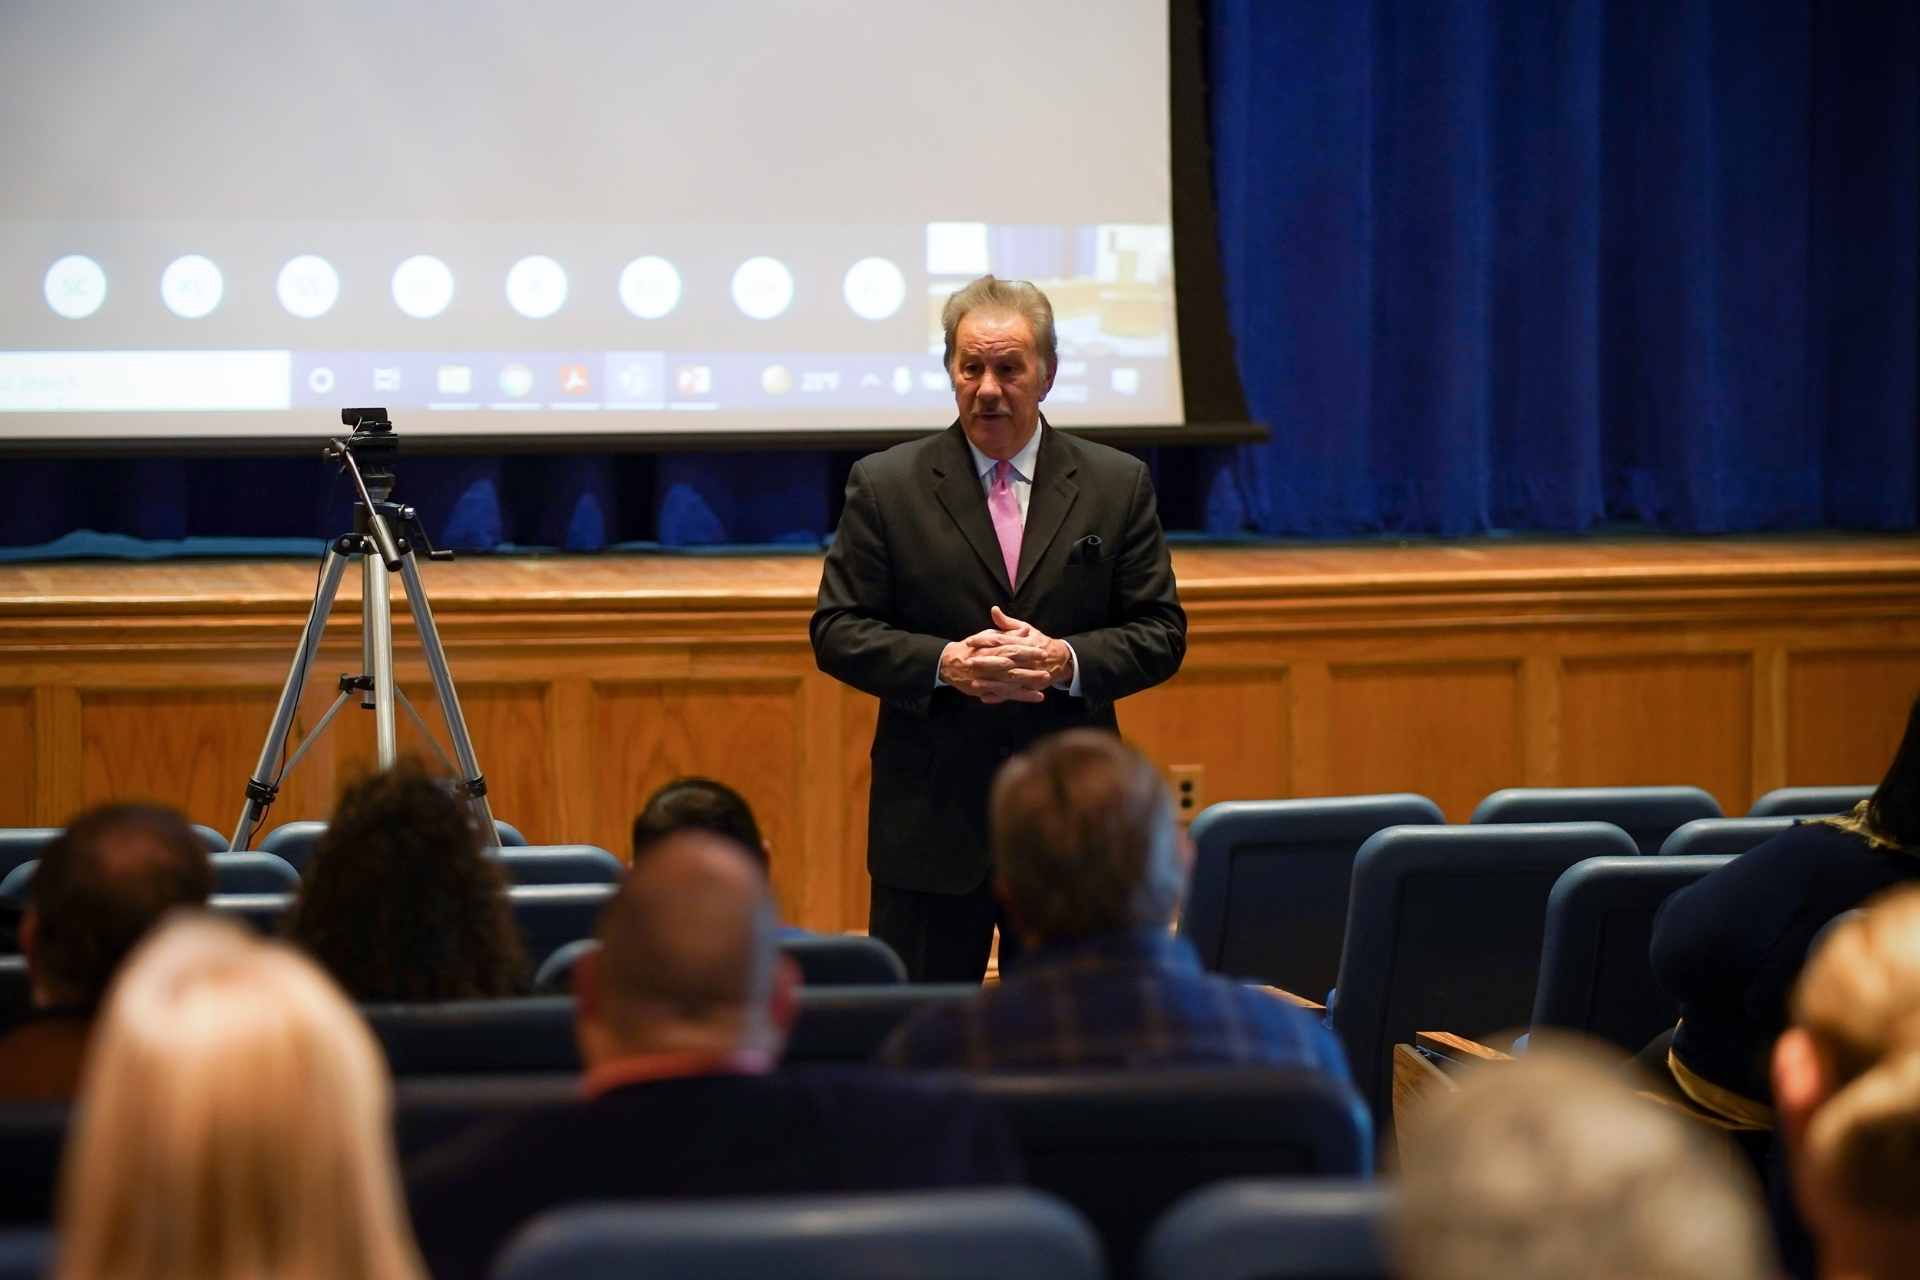 Glenville State College President Dr. Mark A. Manchin speaks to faculty and staff assembled for the annual opening meeting. The meeting is held prior the beginning of each semester and serves as an opportunity for employees to hear campus updates.